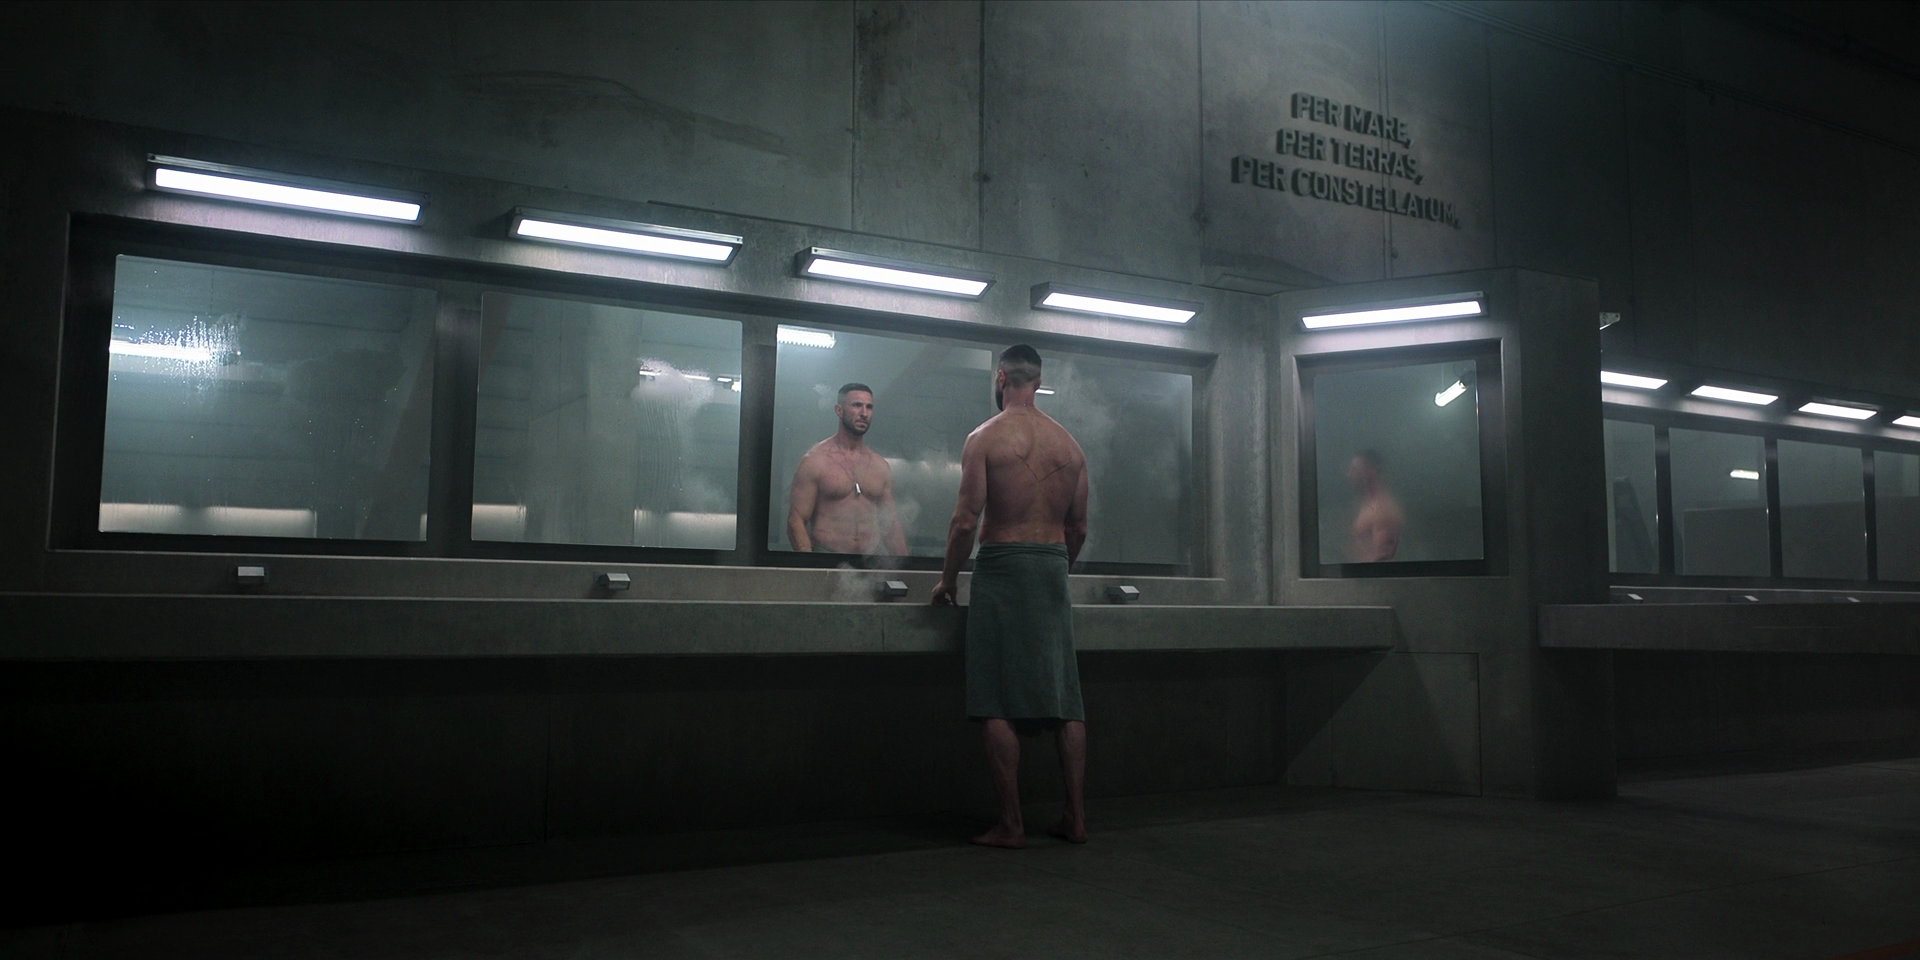 The Master Chief, wearing nothing but a dog-tag and a towel around his waist, stands in front of the mirror at a sink in a long row. Text set into the wall reads PER MARE, PER TERRAS, PER CONSTELLATUM.